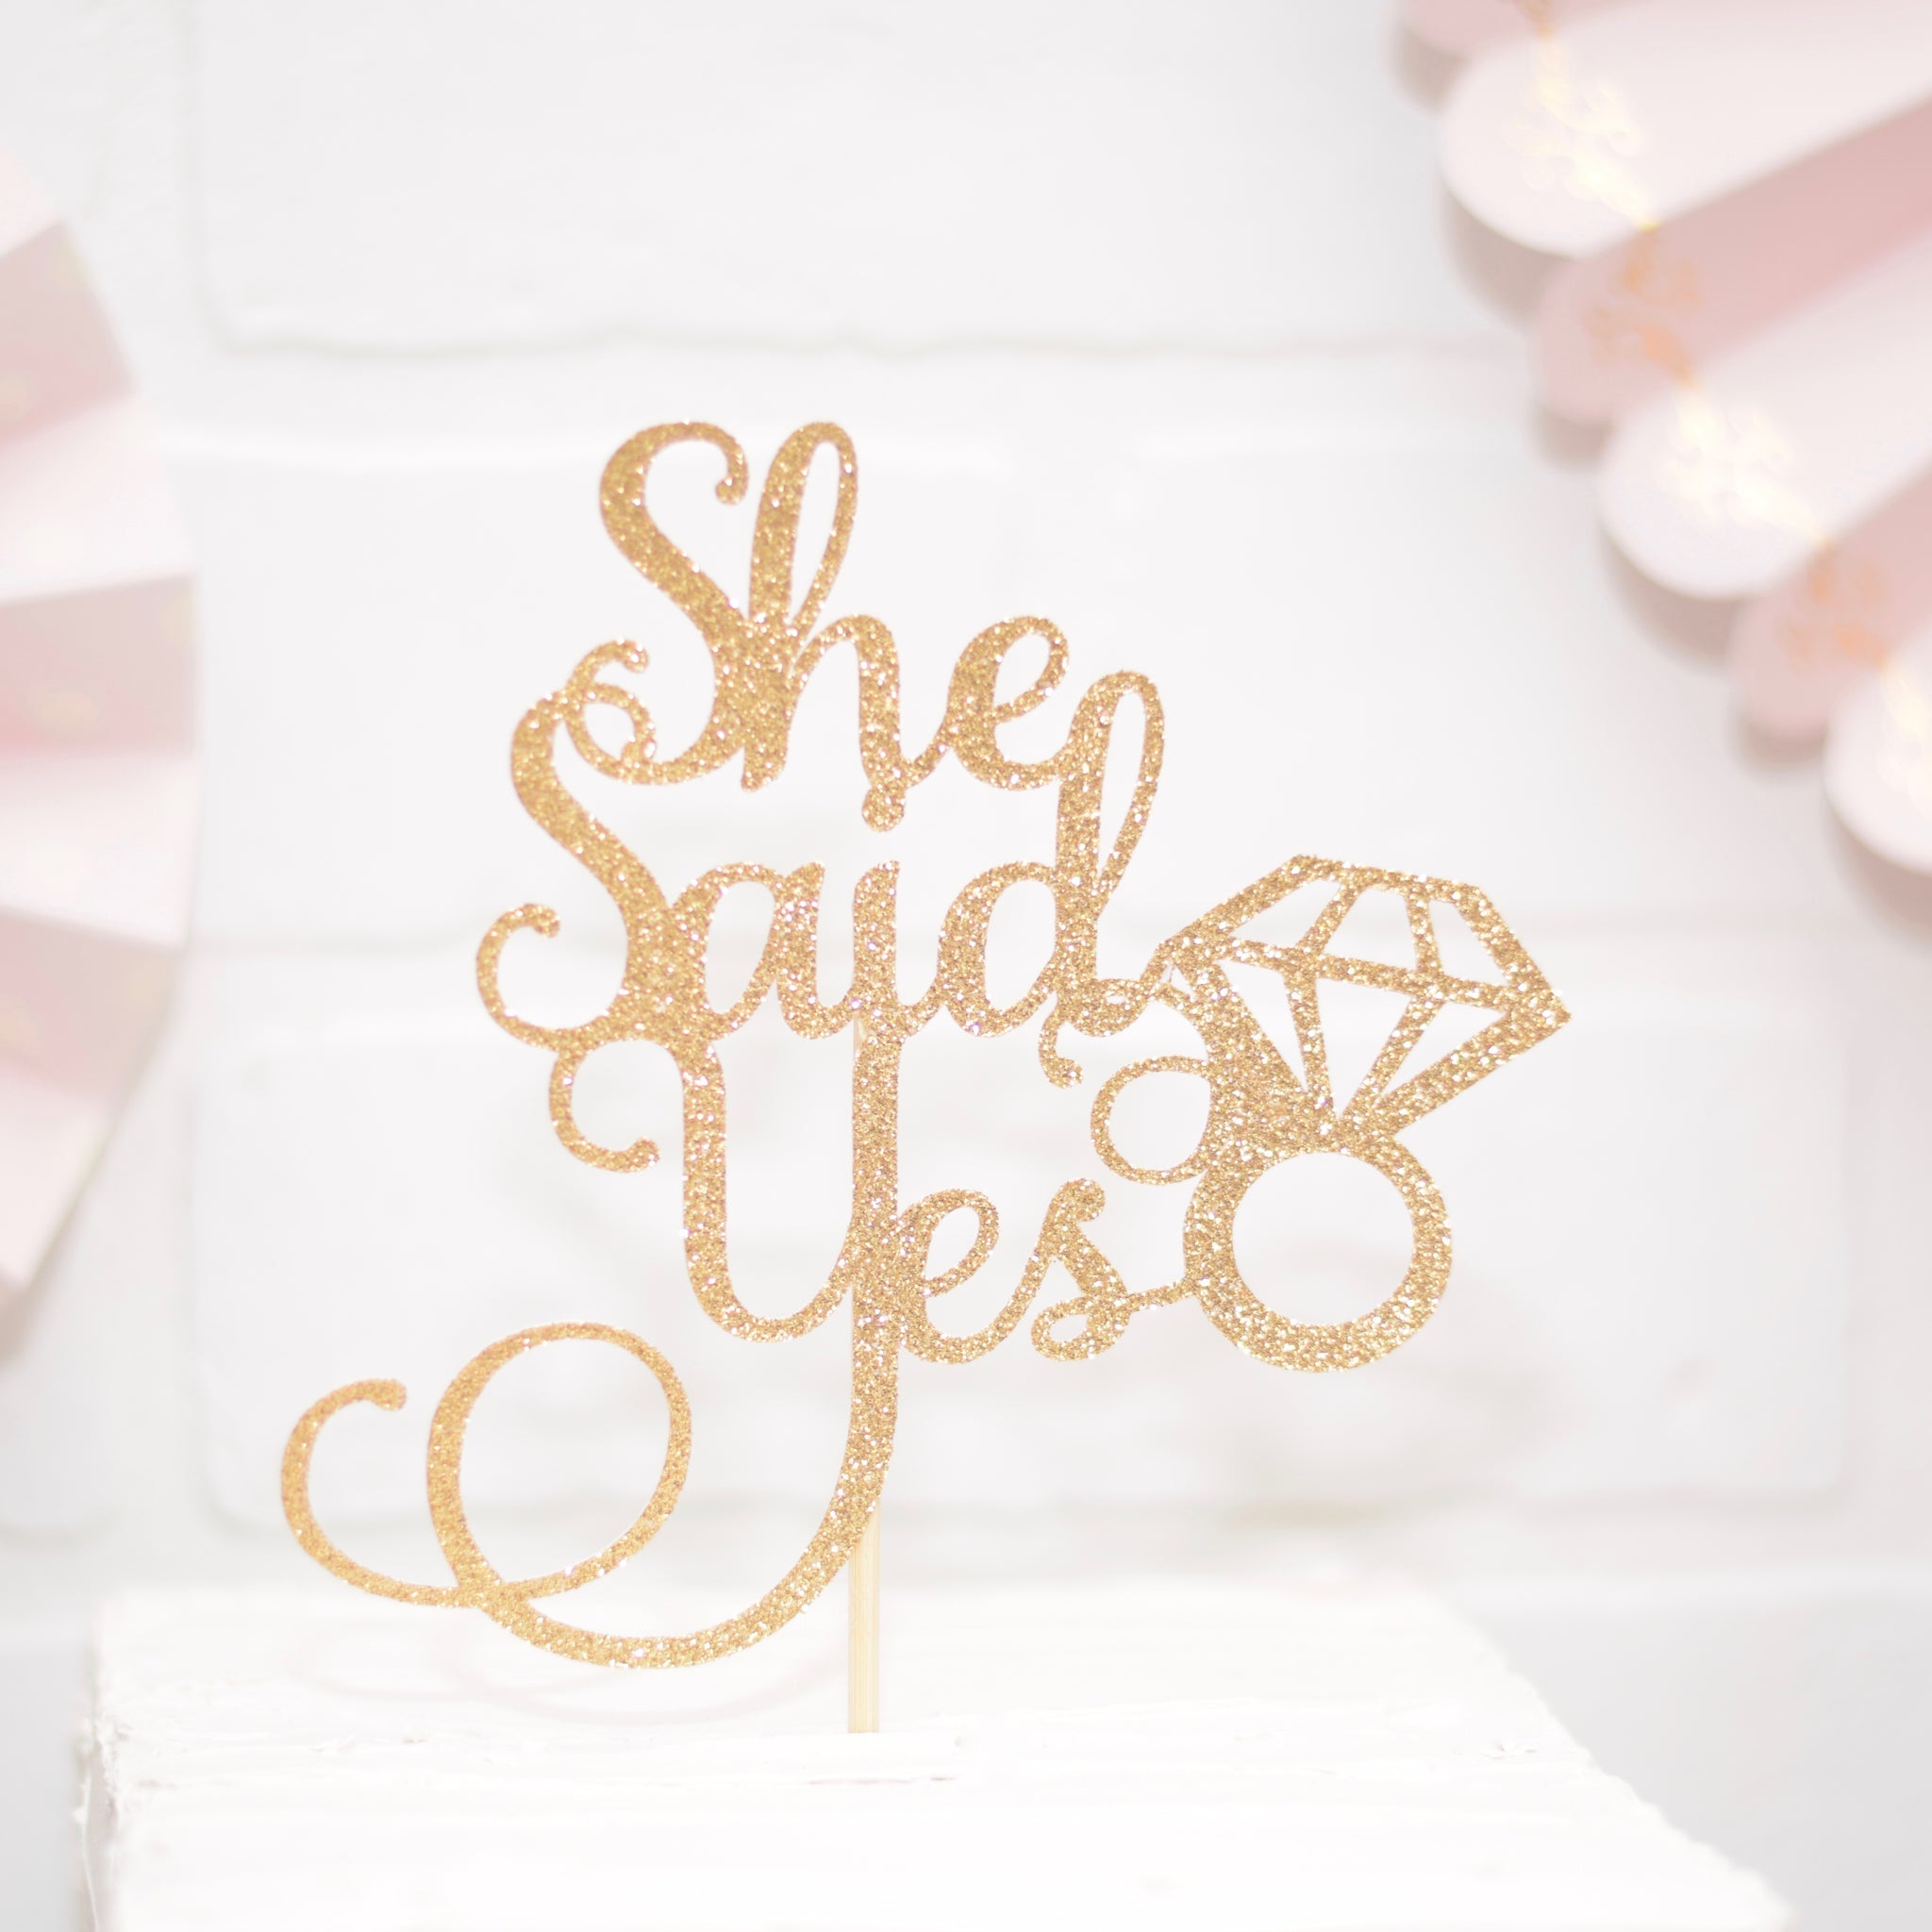 UsaSales She Said Yes Bridal Shower Cake Topper by Usa-sales SELLER for  sale online